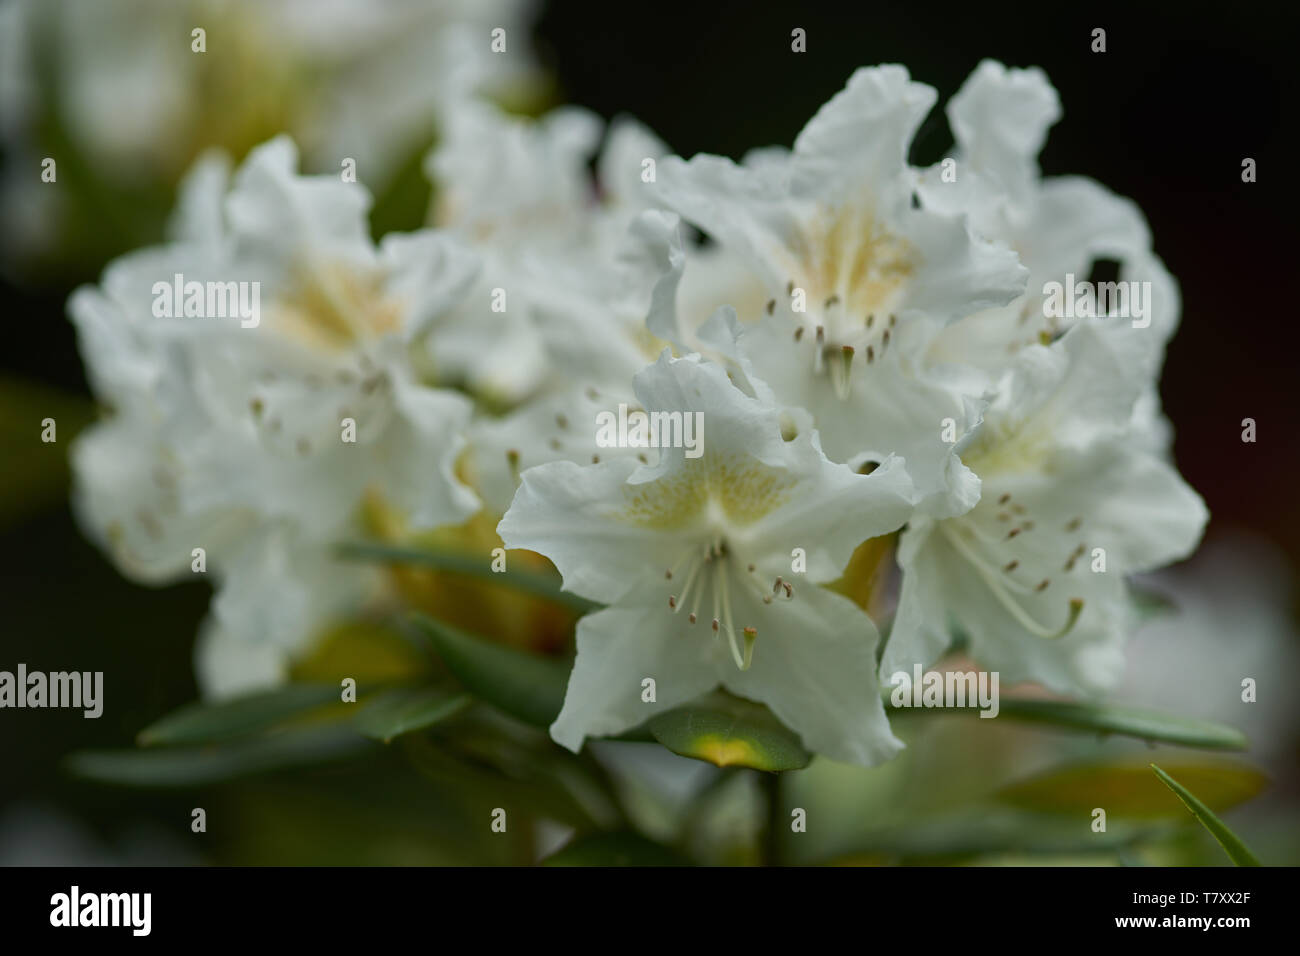 Rhododendron Cunningham's white flower close up Stock Photo